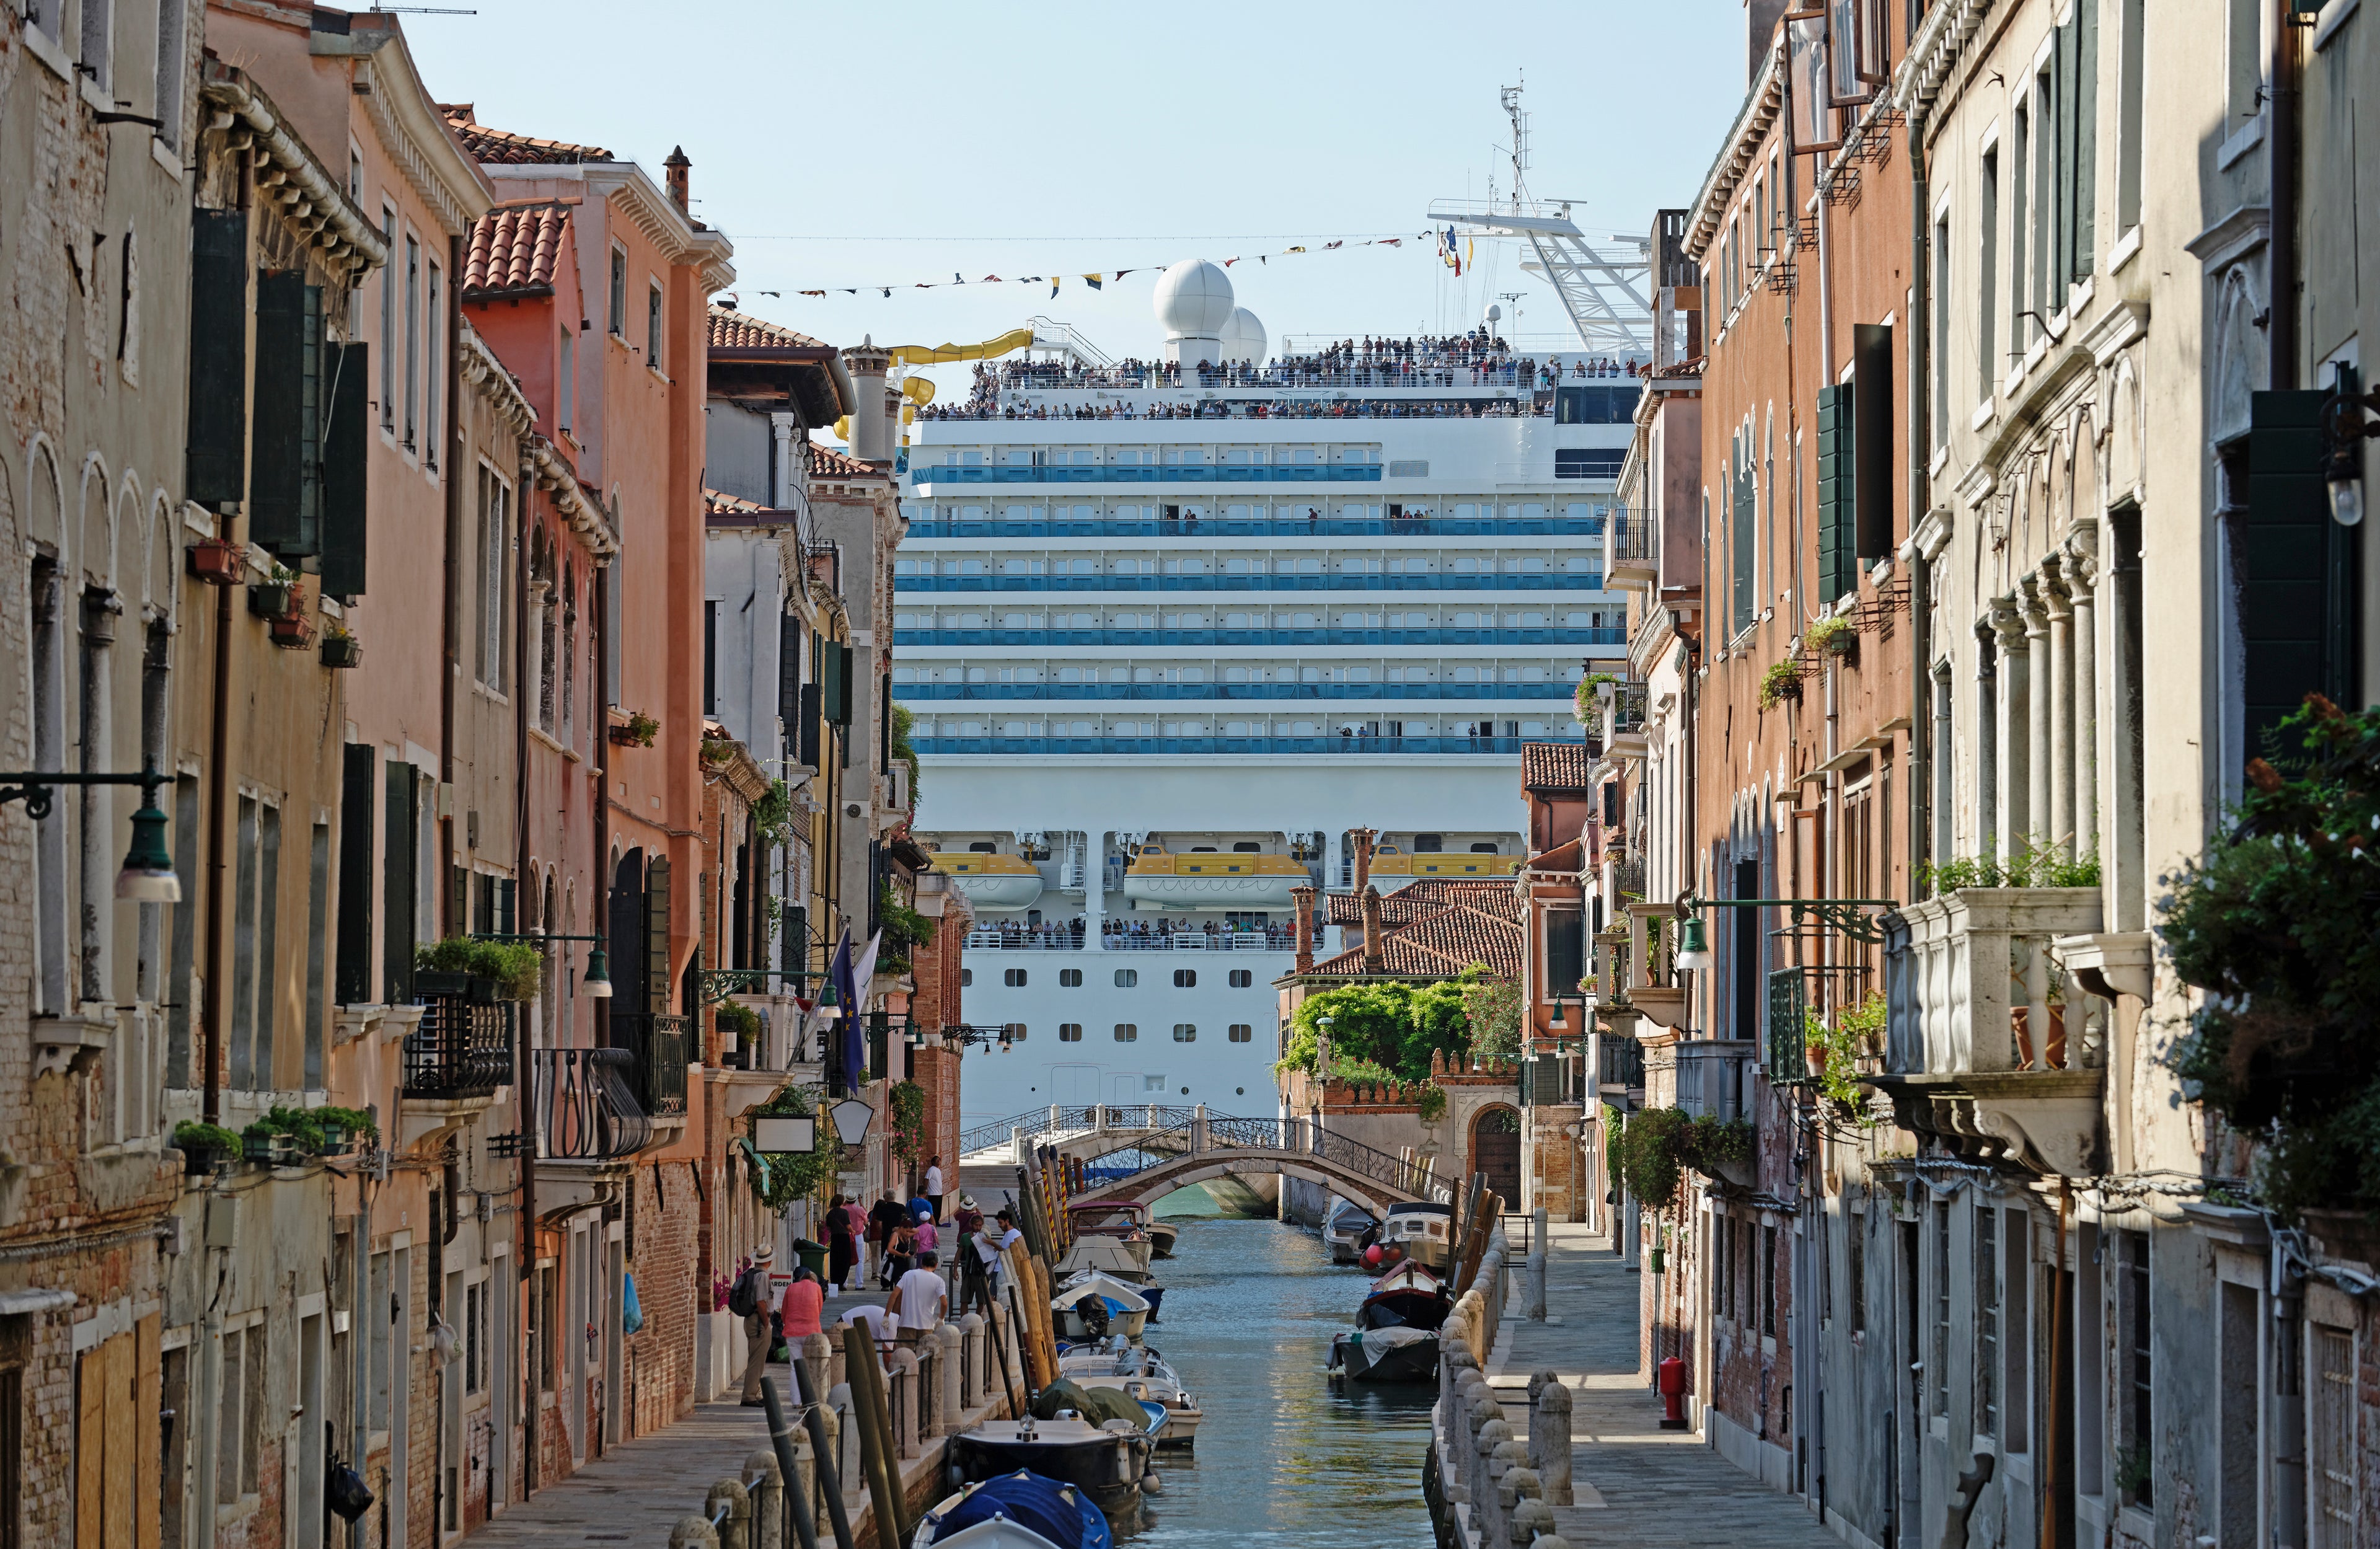 Huge cruise ship seen from canal in city, Venice, Veneto, Italy